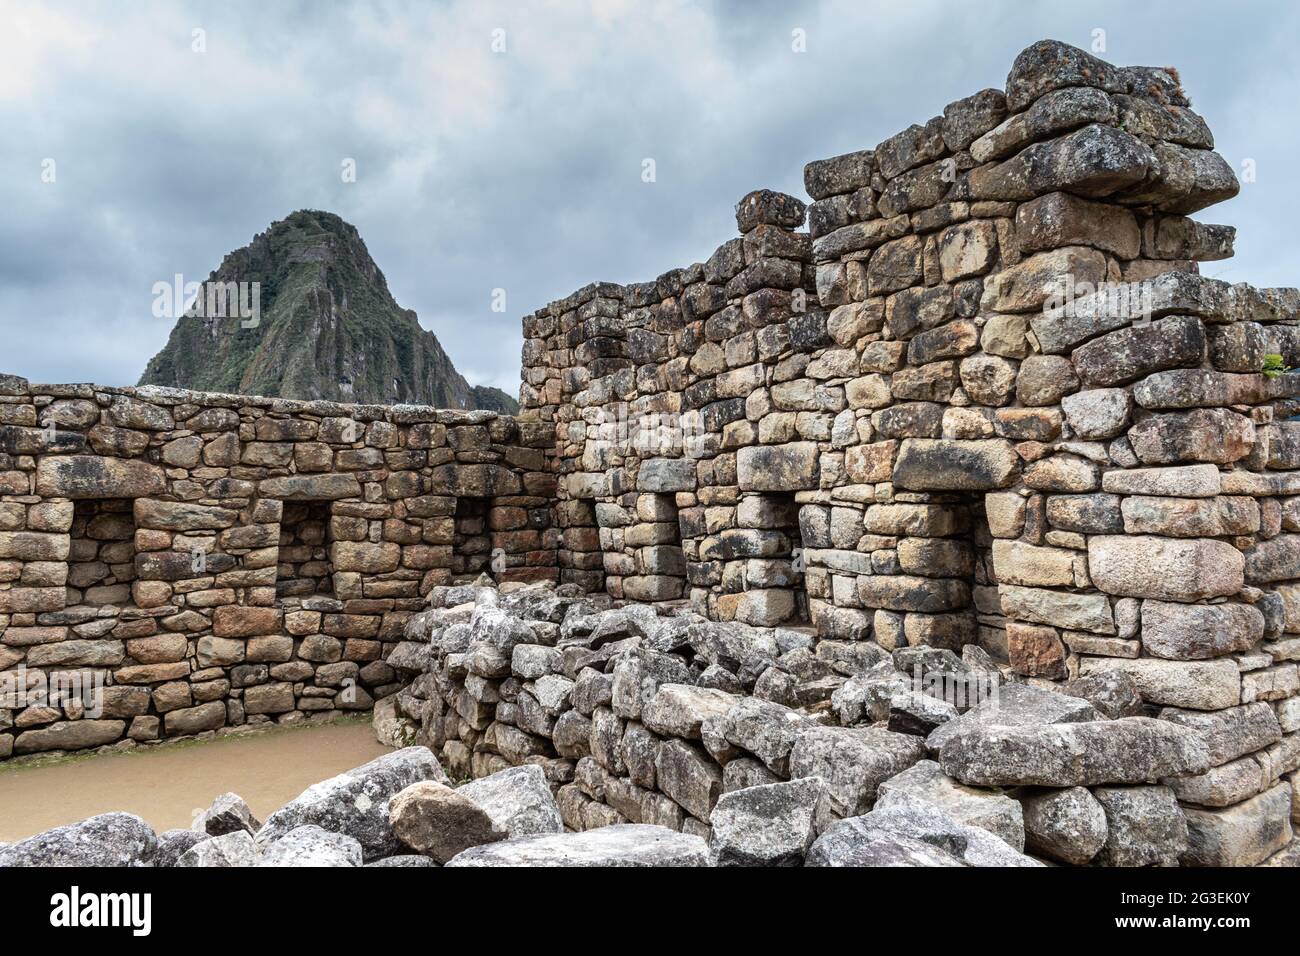 Walls and alcoves in the residential or urban sector of the Machu Picchu archaeological complex, Sacred Valley, Peru Stock Photo